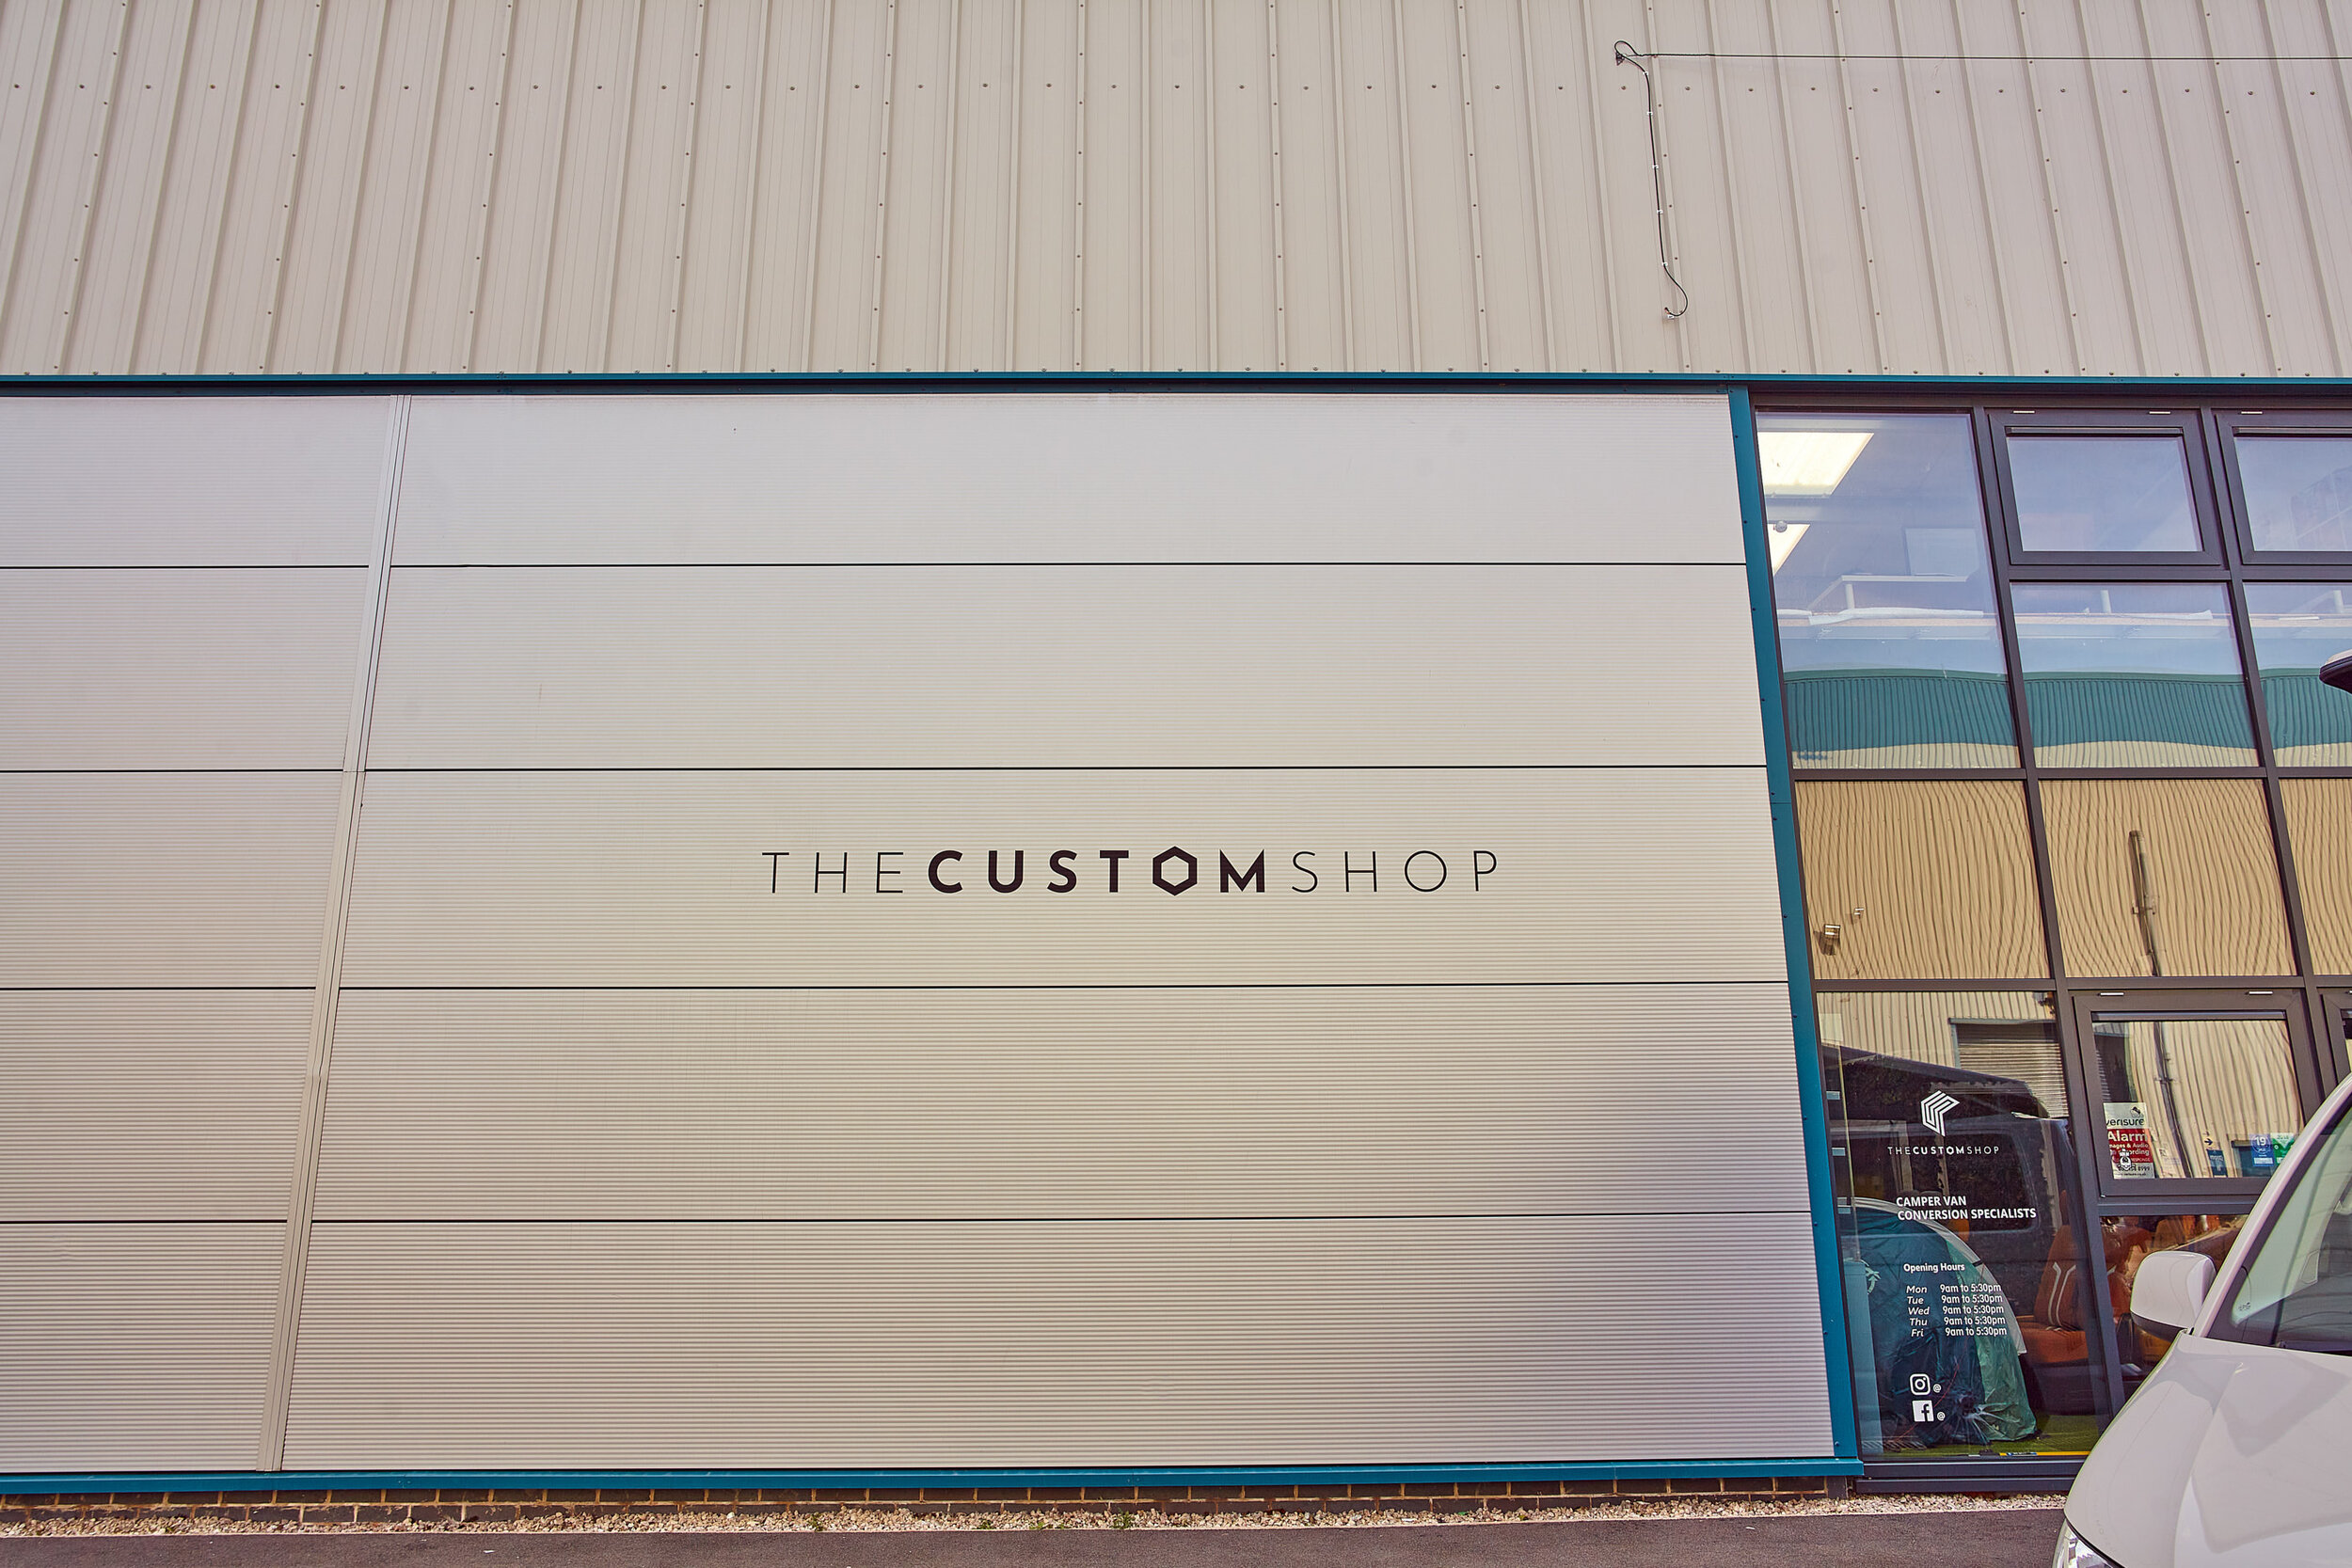 Outside The Custom Shop in Liverpool